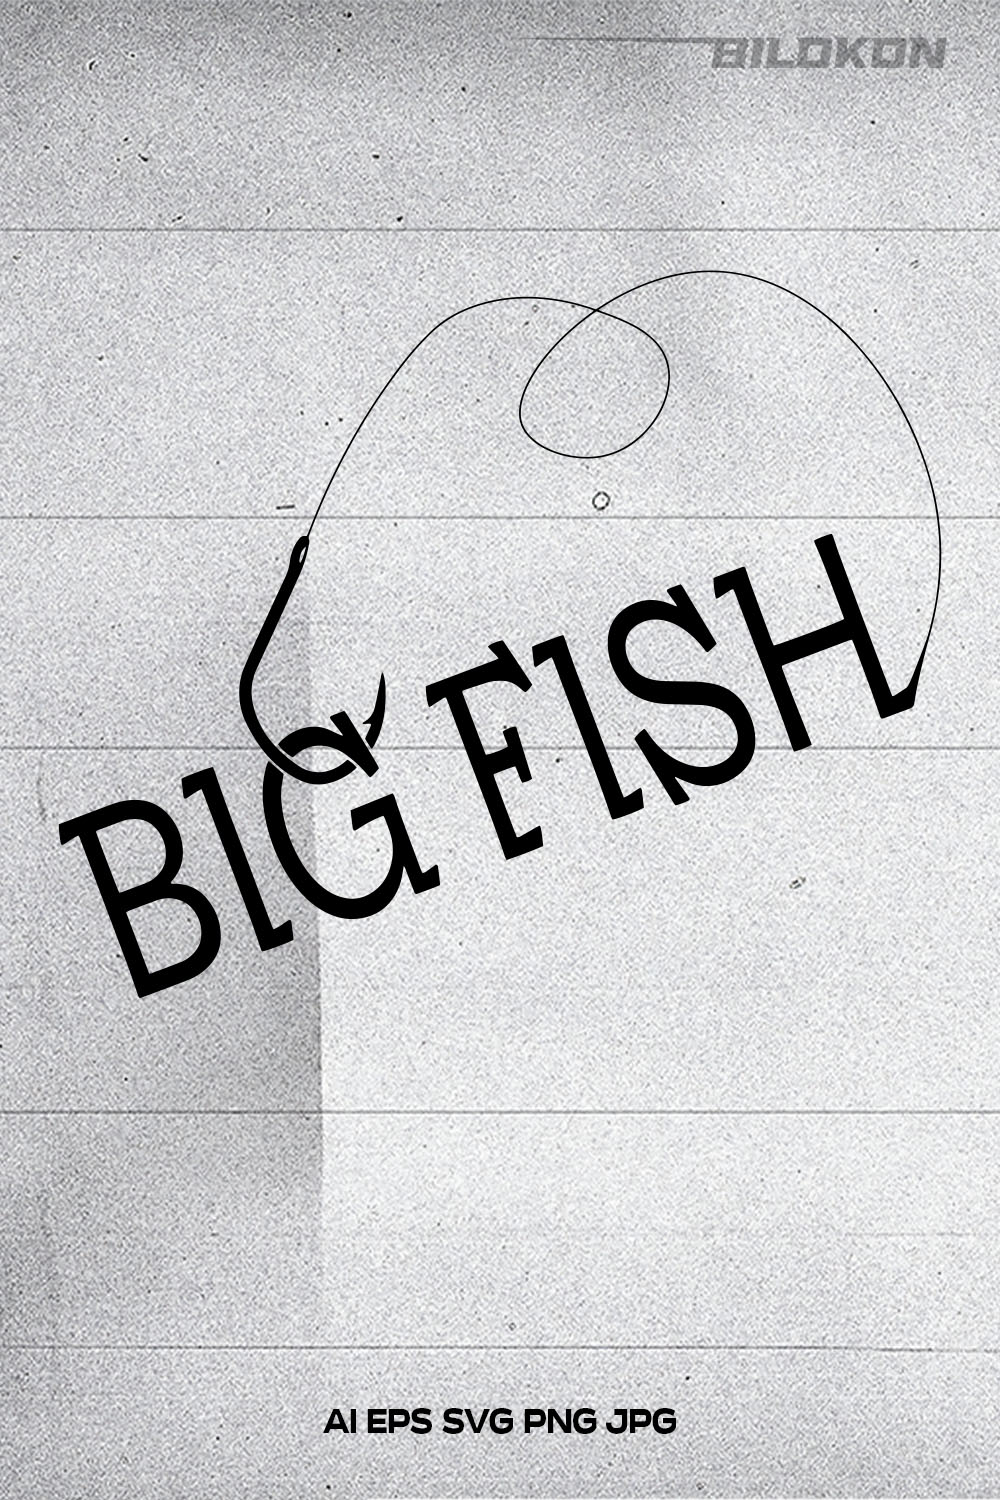 Piece of paper with the words big fish on it.